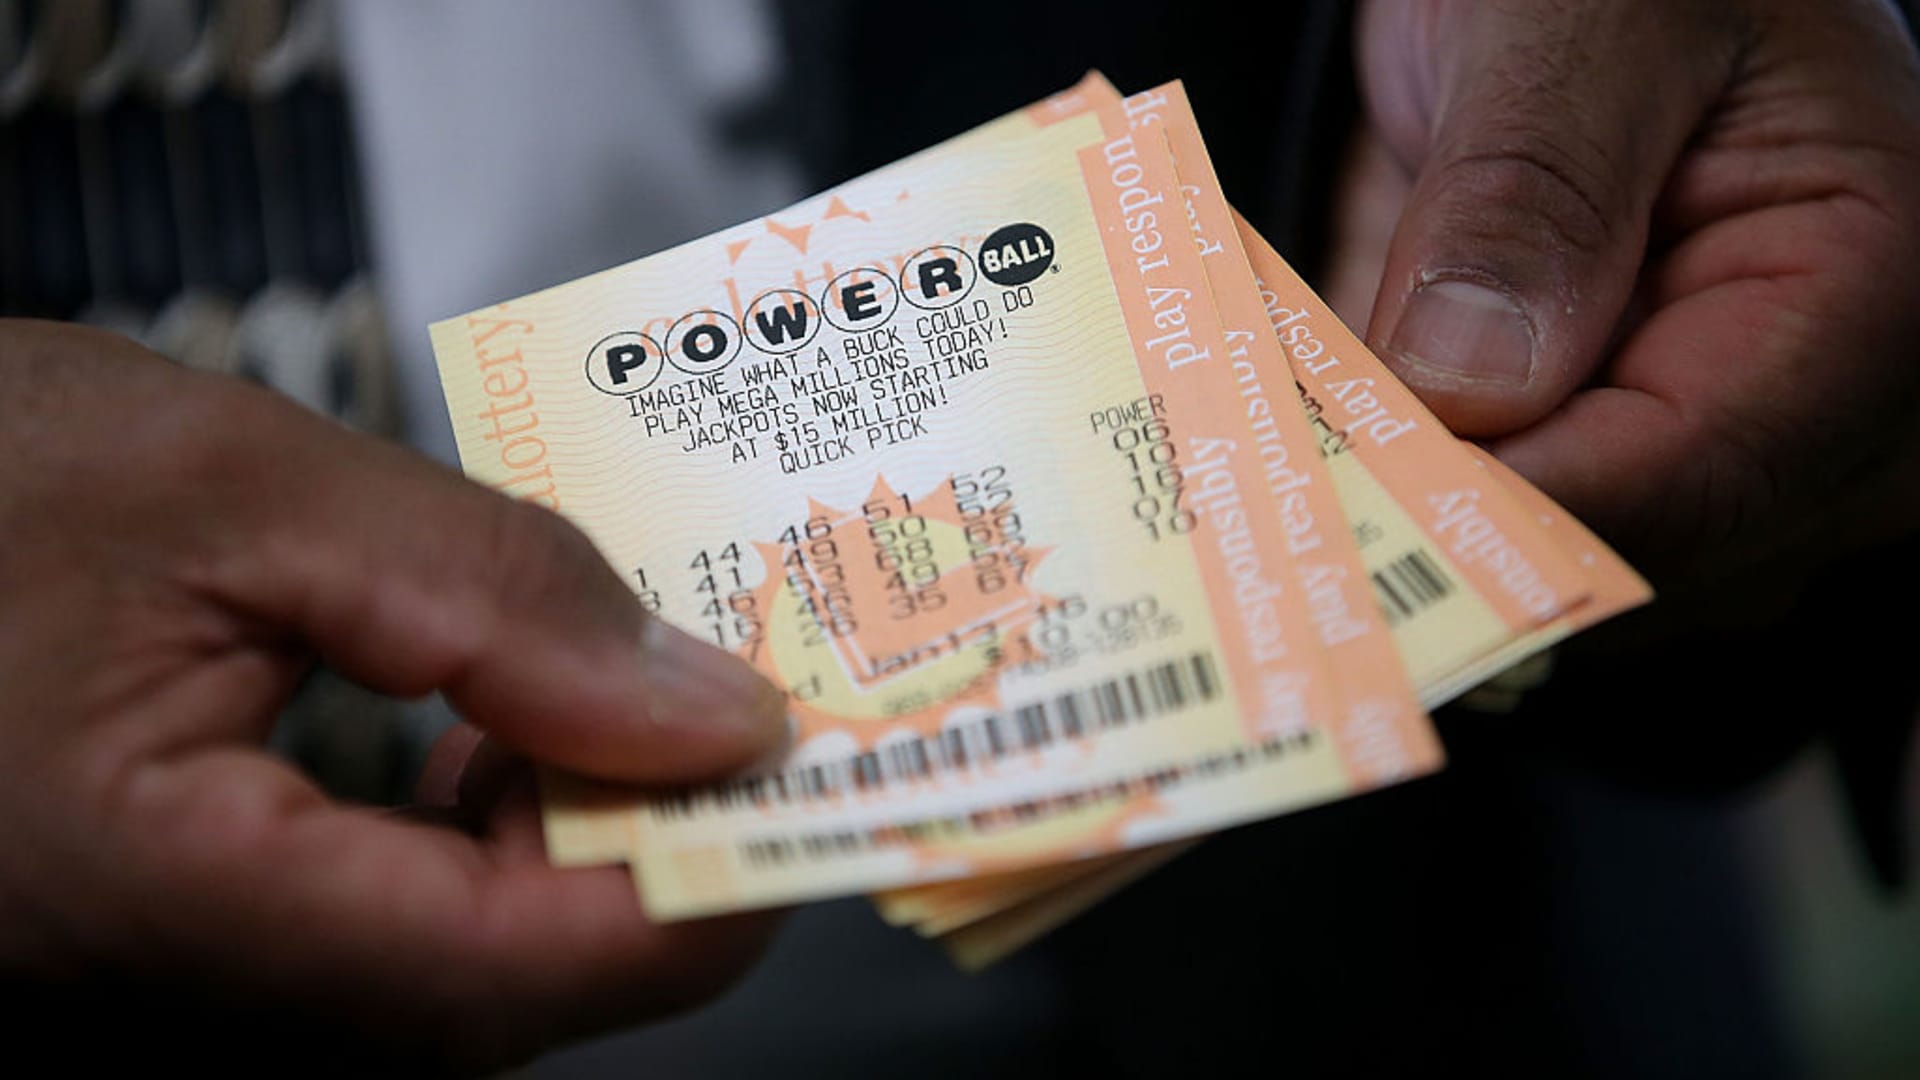 Powerball jackpot hits $1.4 billion. What winners should do first